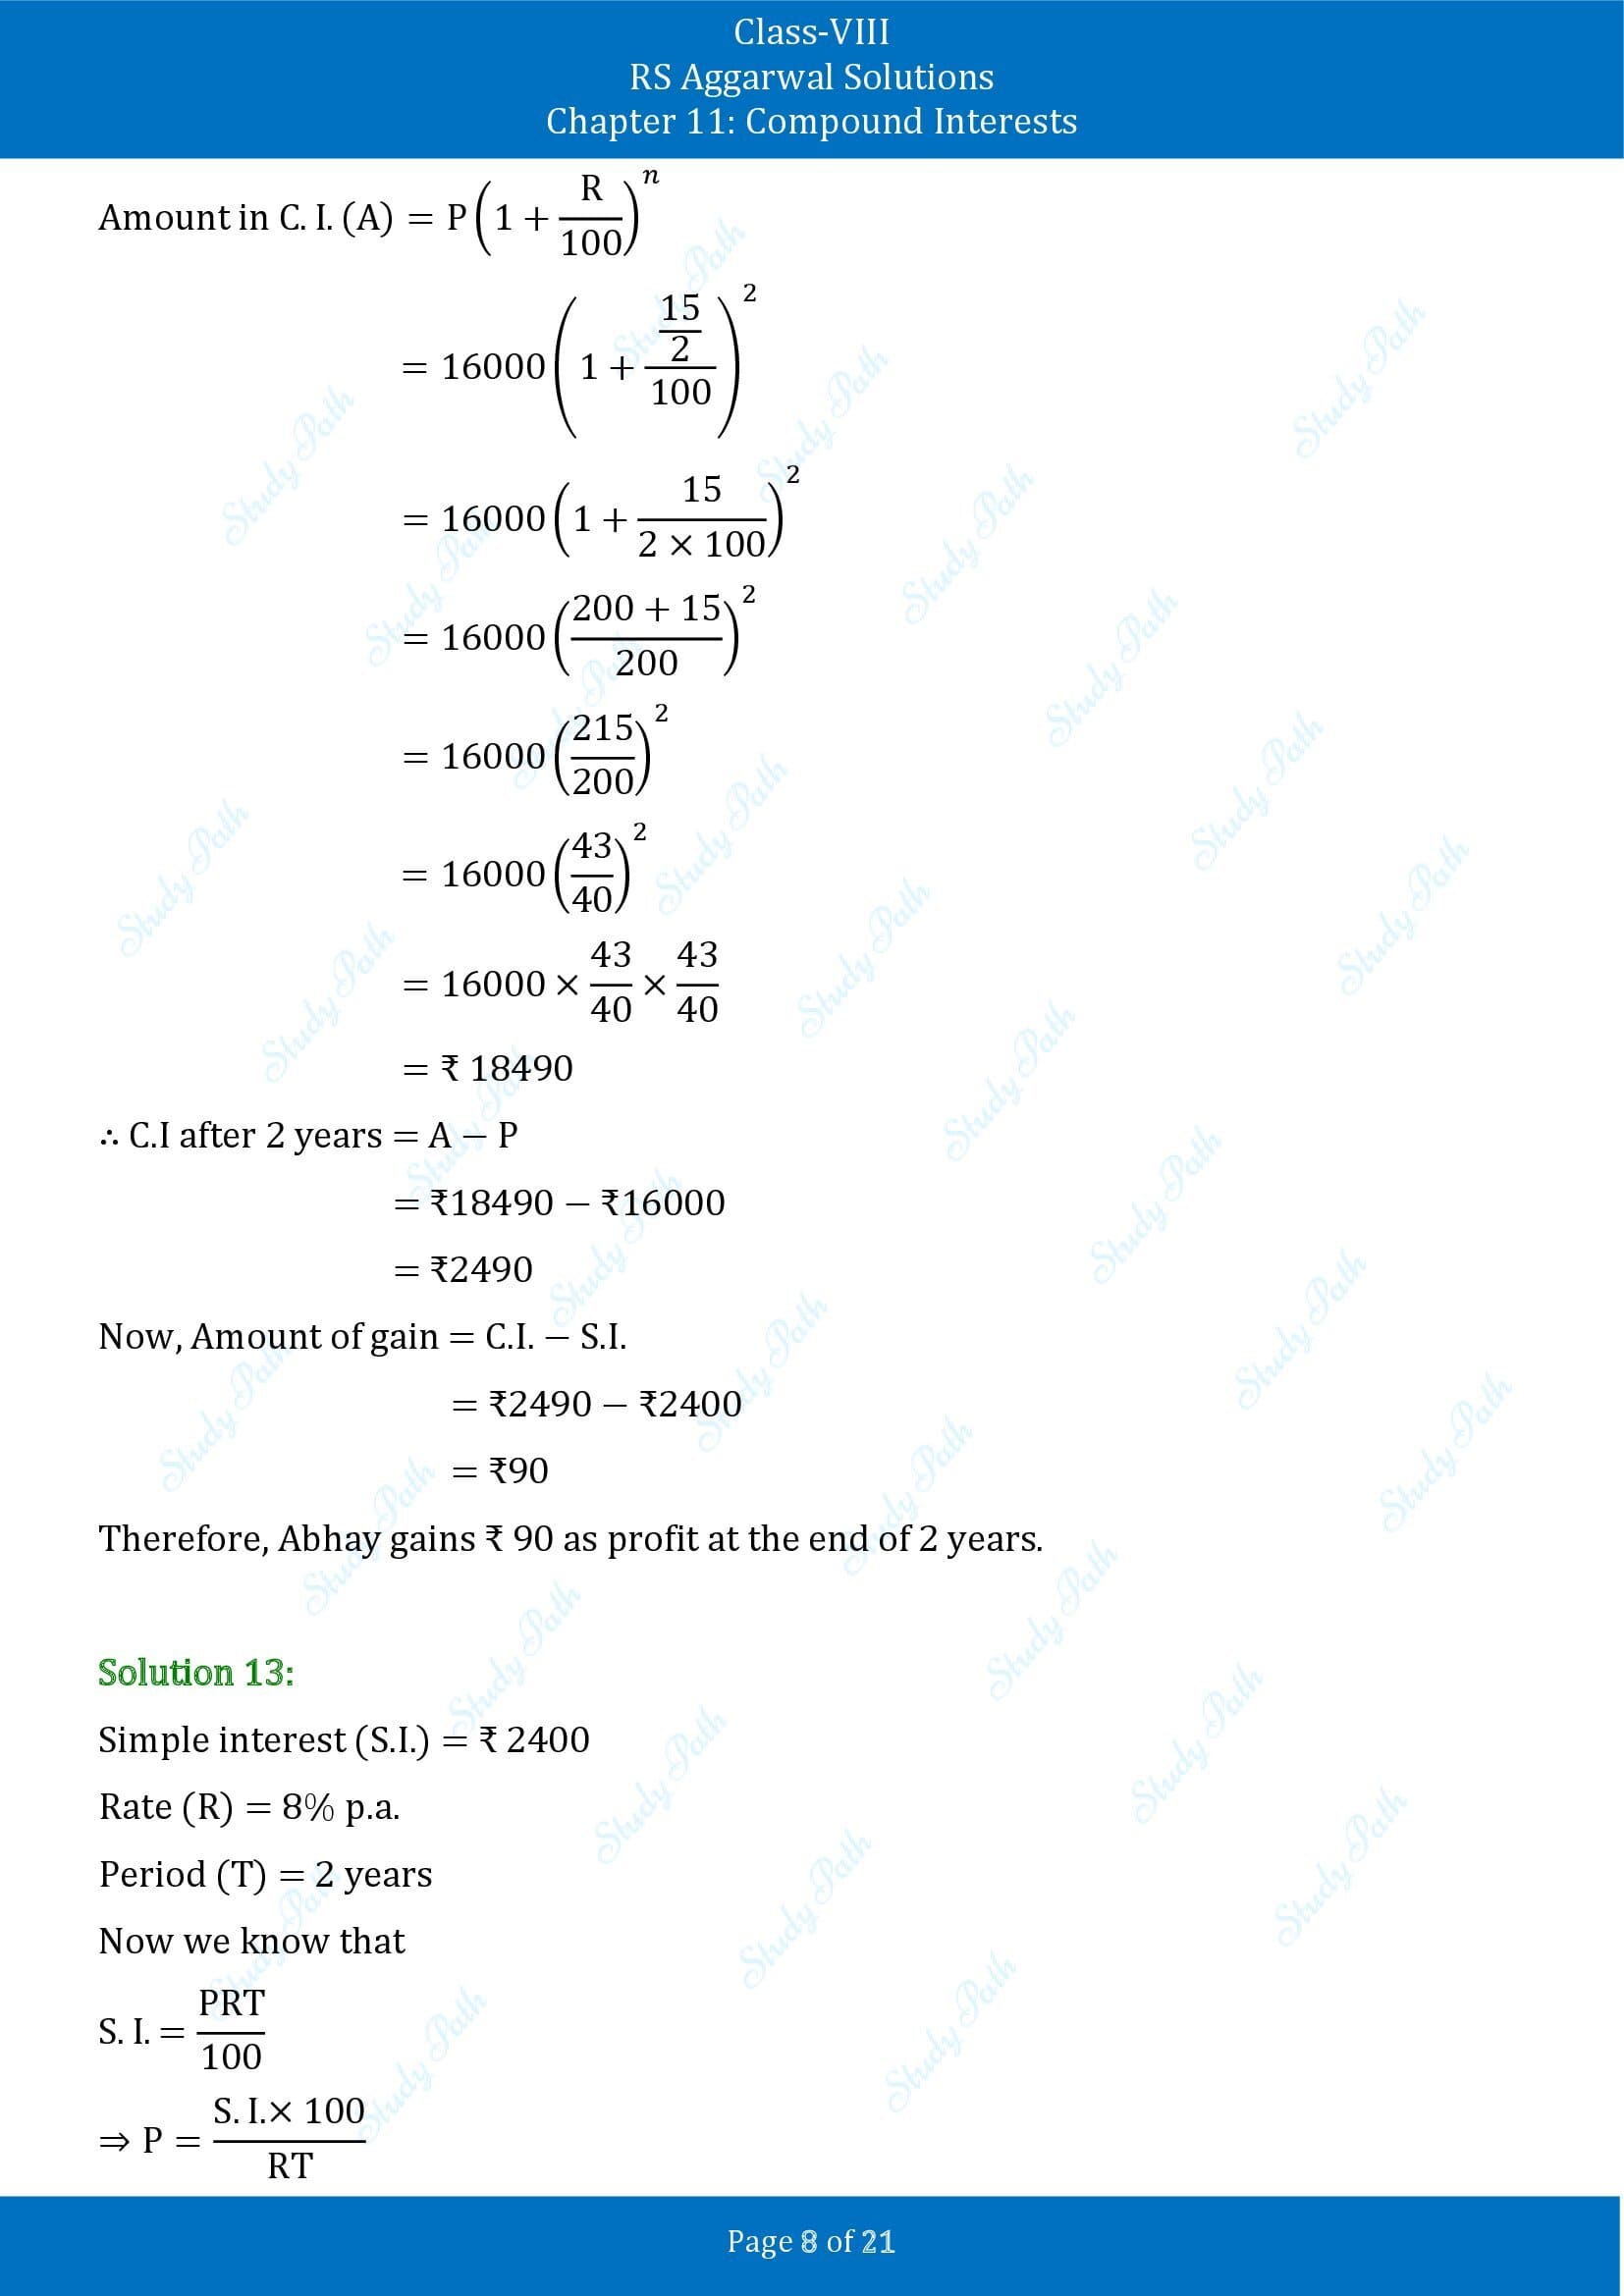 RS Aggarwal Solutions Class 8 Chapter 11 Compound Interests Exercise 11B 00008